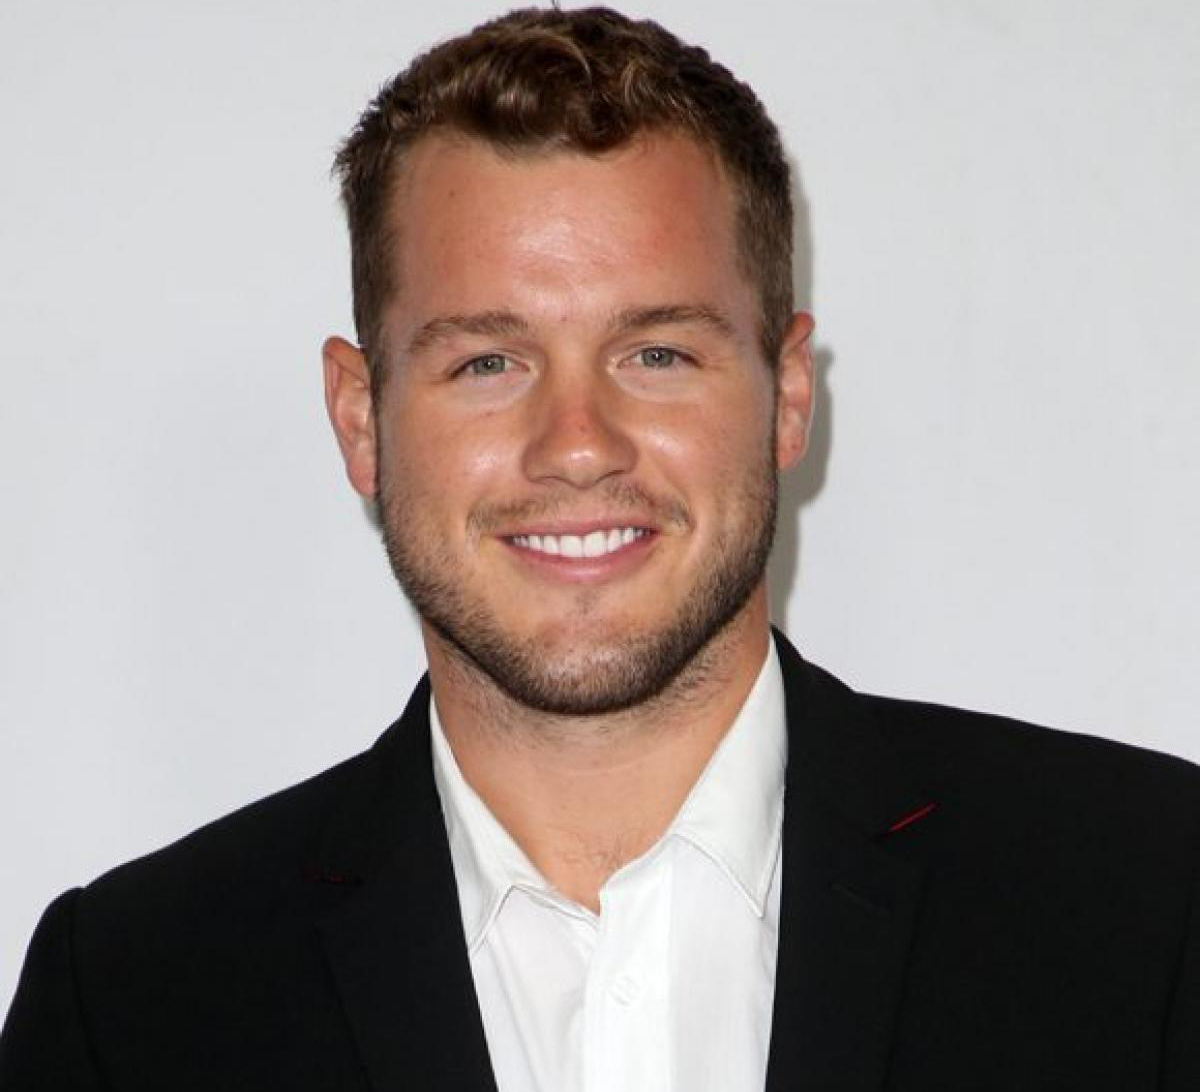 Colton Underwood Courts Controversy For Saying Menstruation Is Like 'If